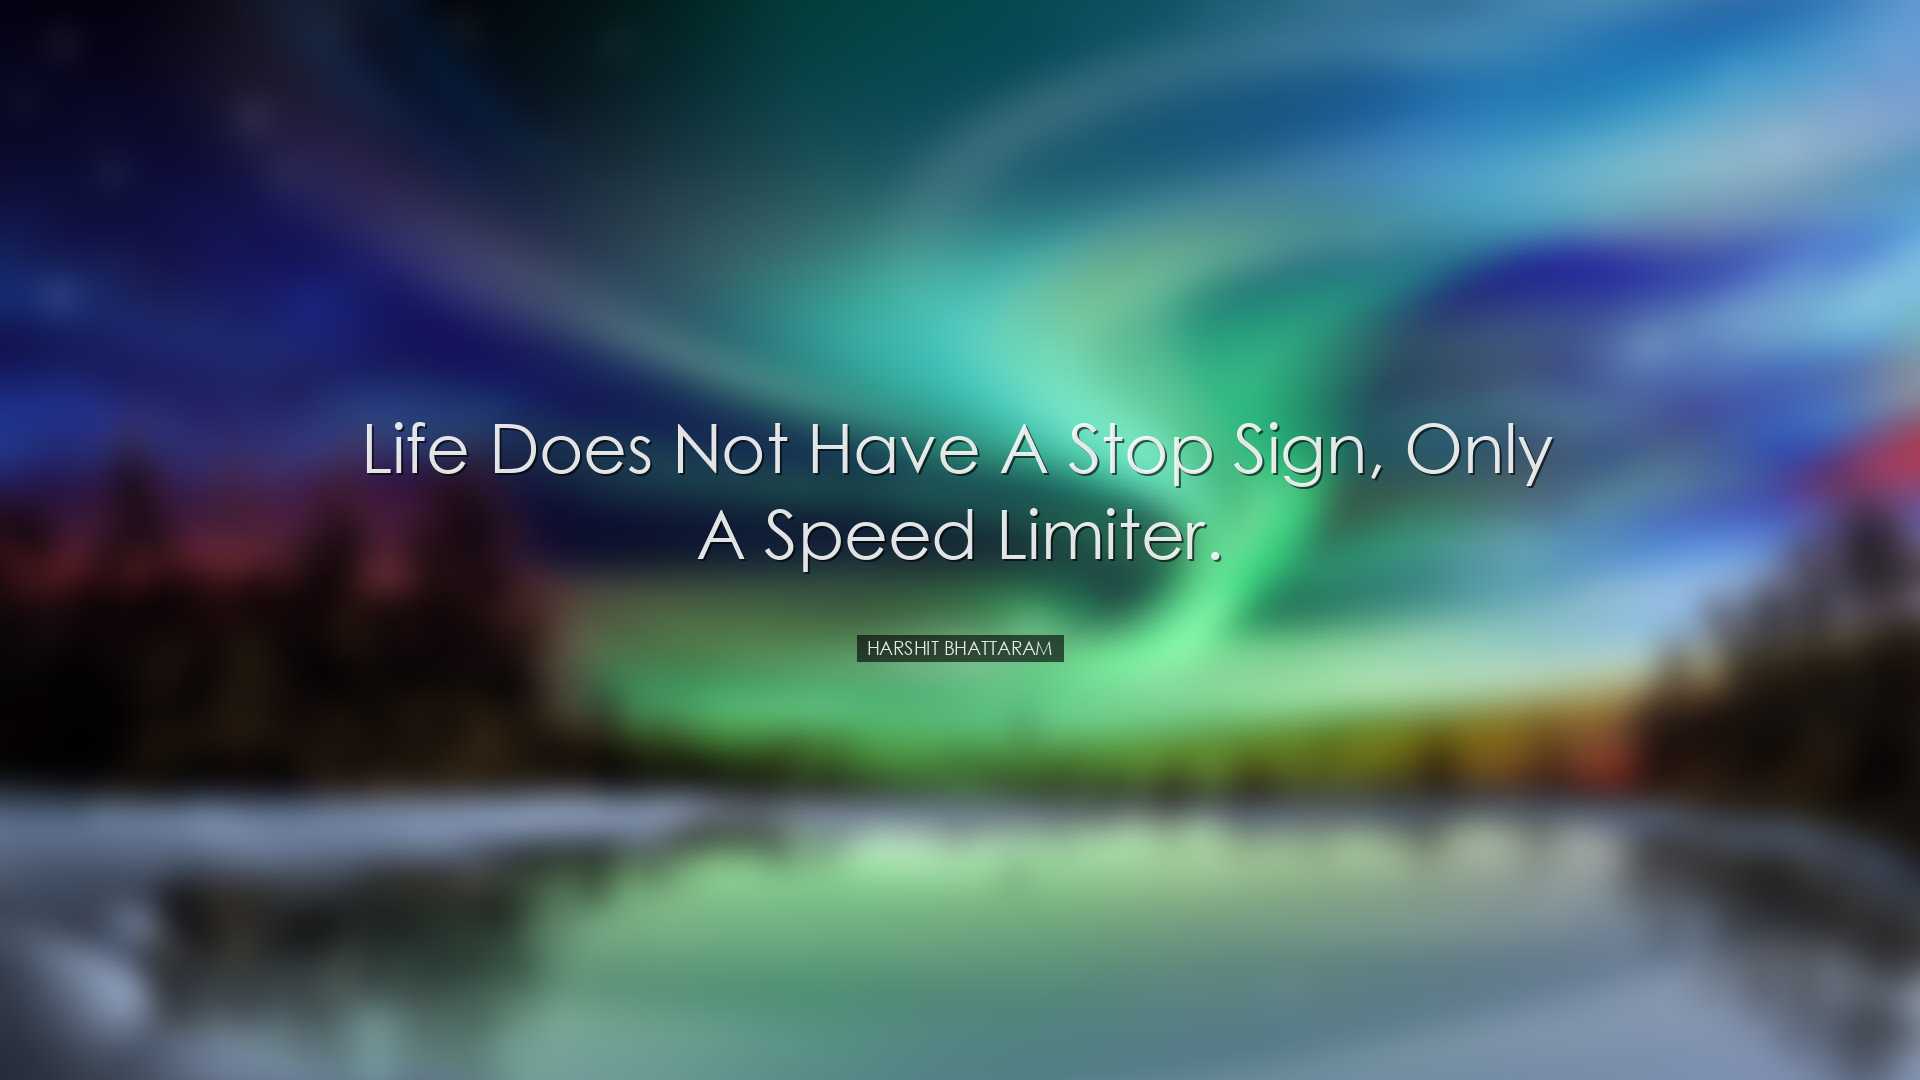 Life does not have a stop sign, only a speed limiter. - Harshit Bh